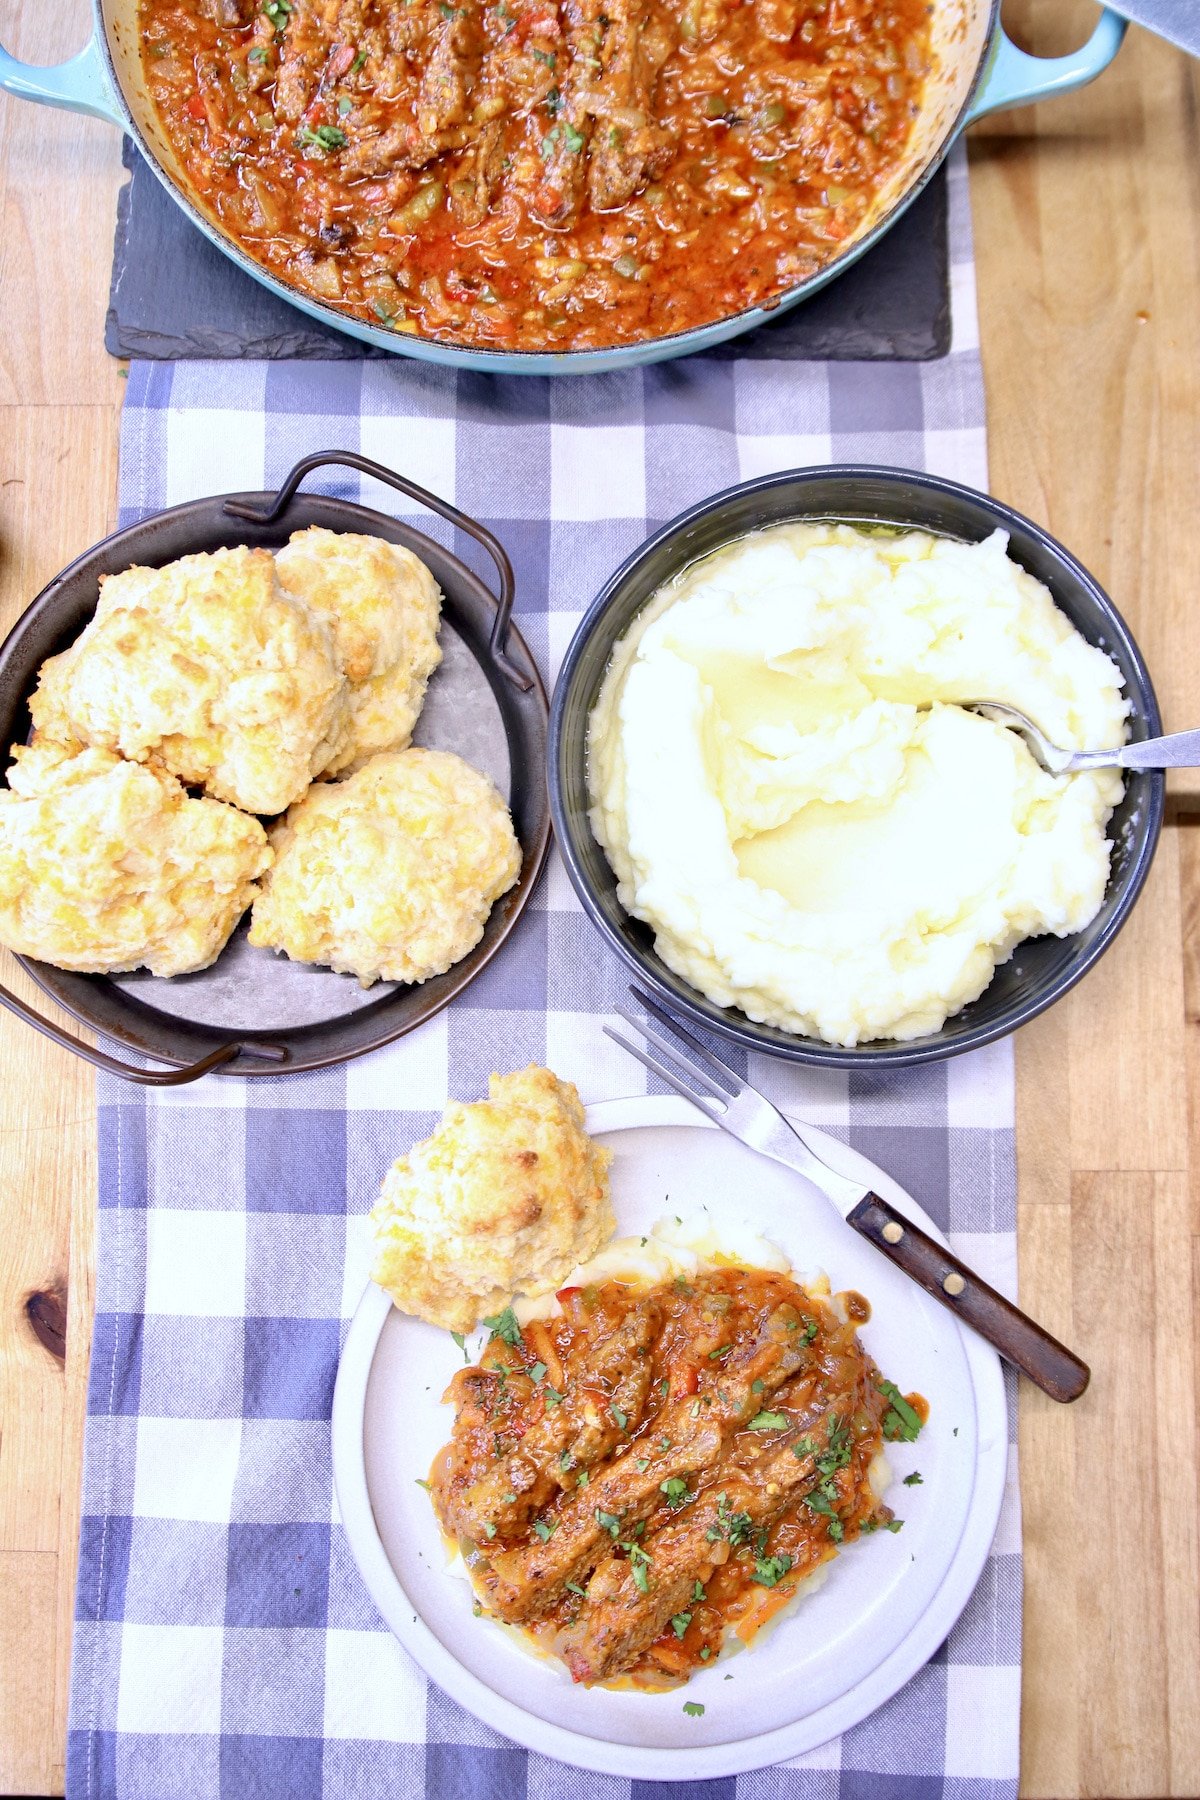 Swiss Steak on a plate with mashed potatoes, biscuits.